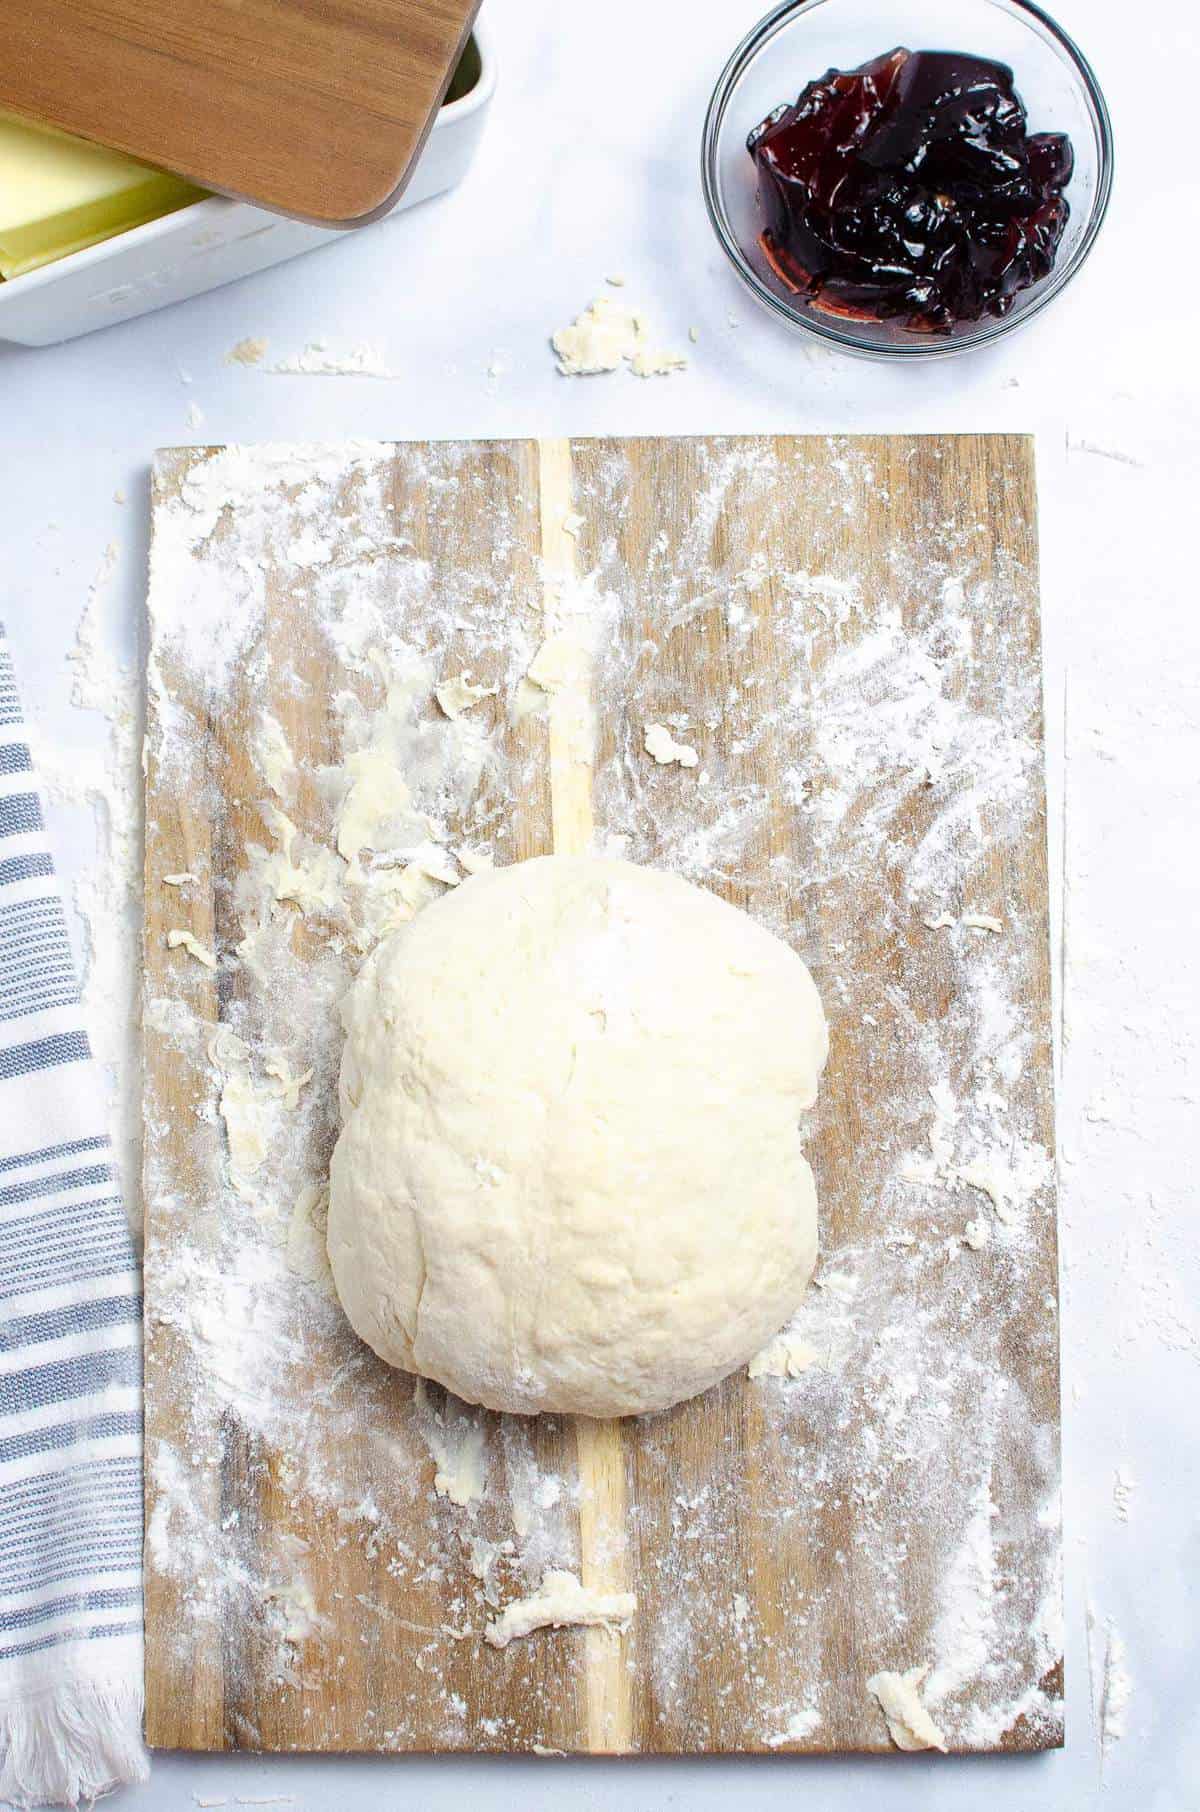 A ball of biscuit dough on a wood cutting board.